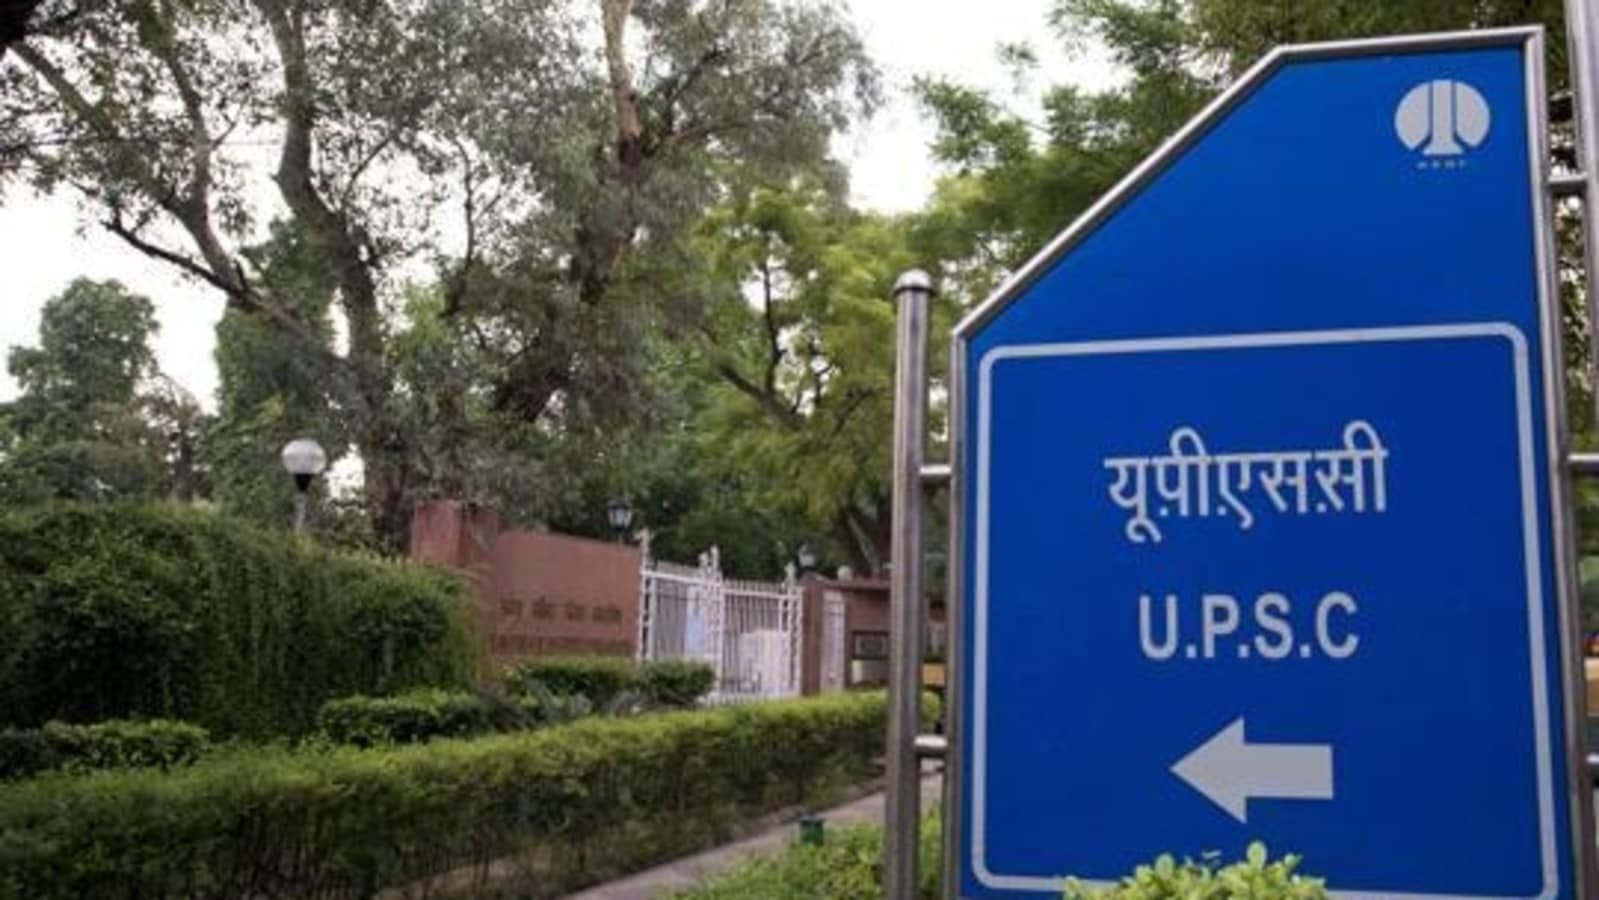 UPSC Recruitment 2021: Apply for Faculty and other posts on upsc.gov.in